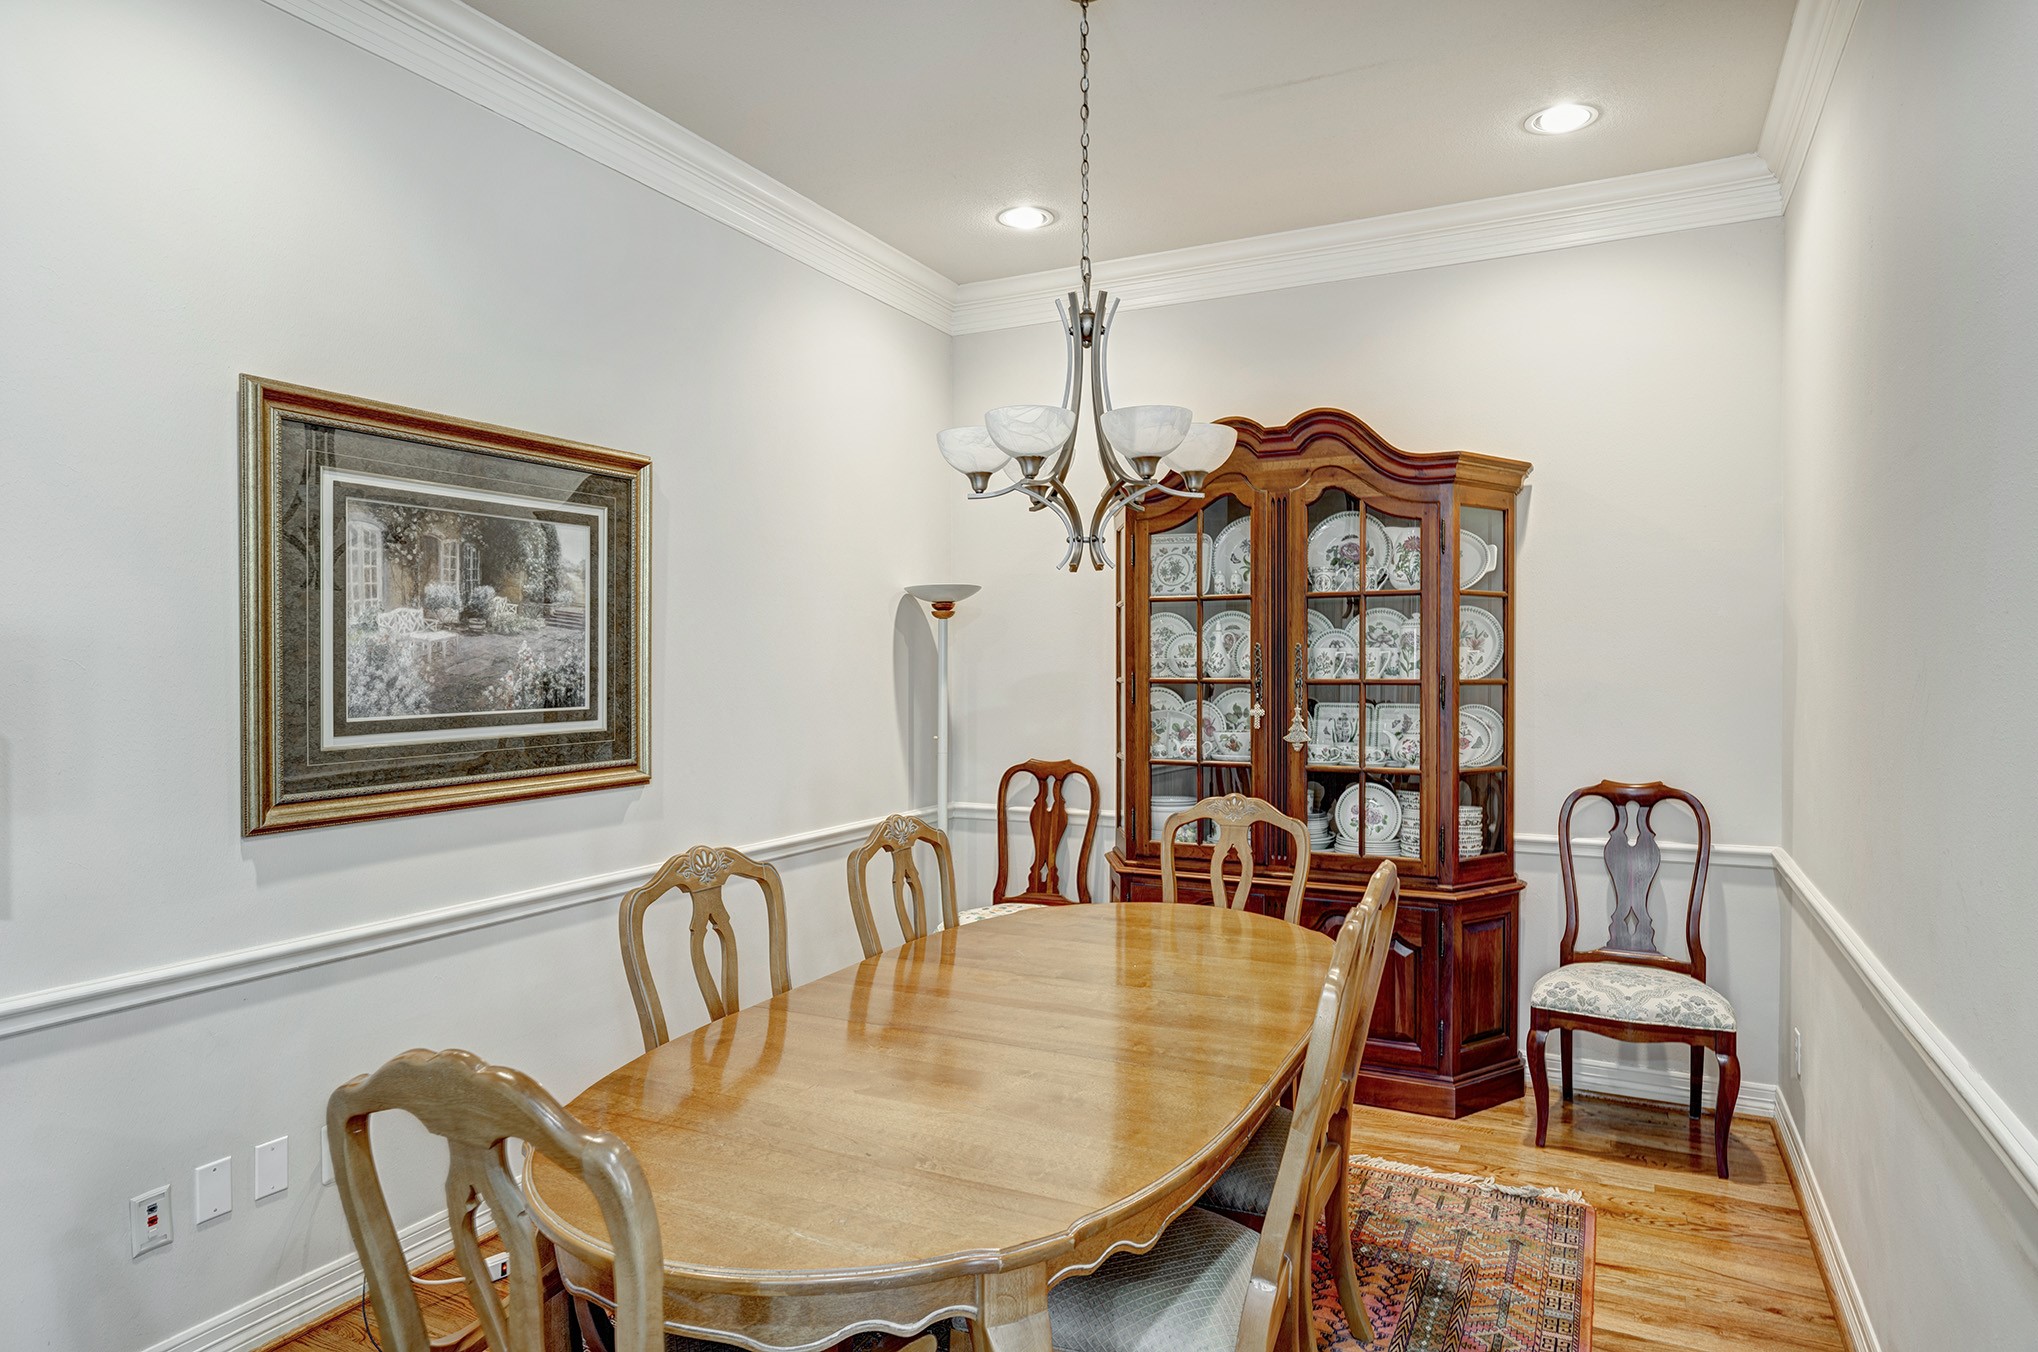 Dining Room is the first room on the left. Chair rail is an enchanced feature.